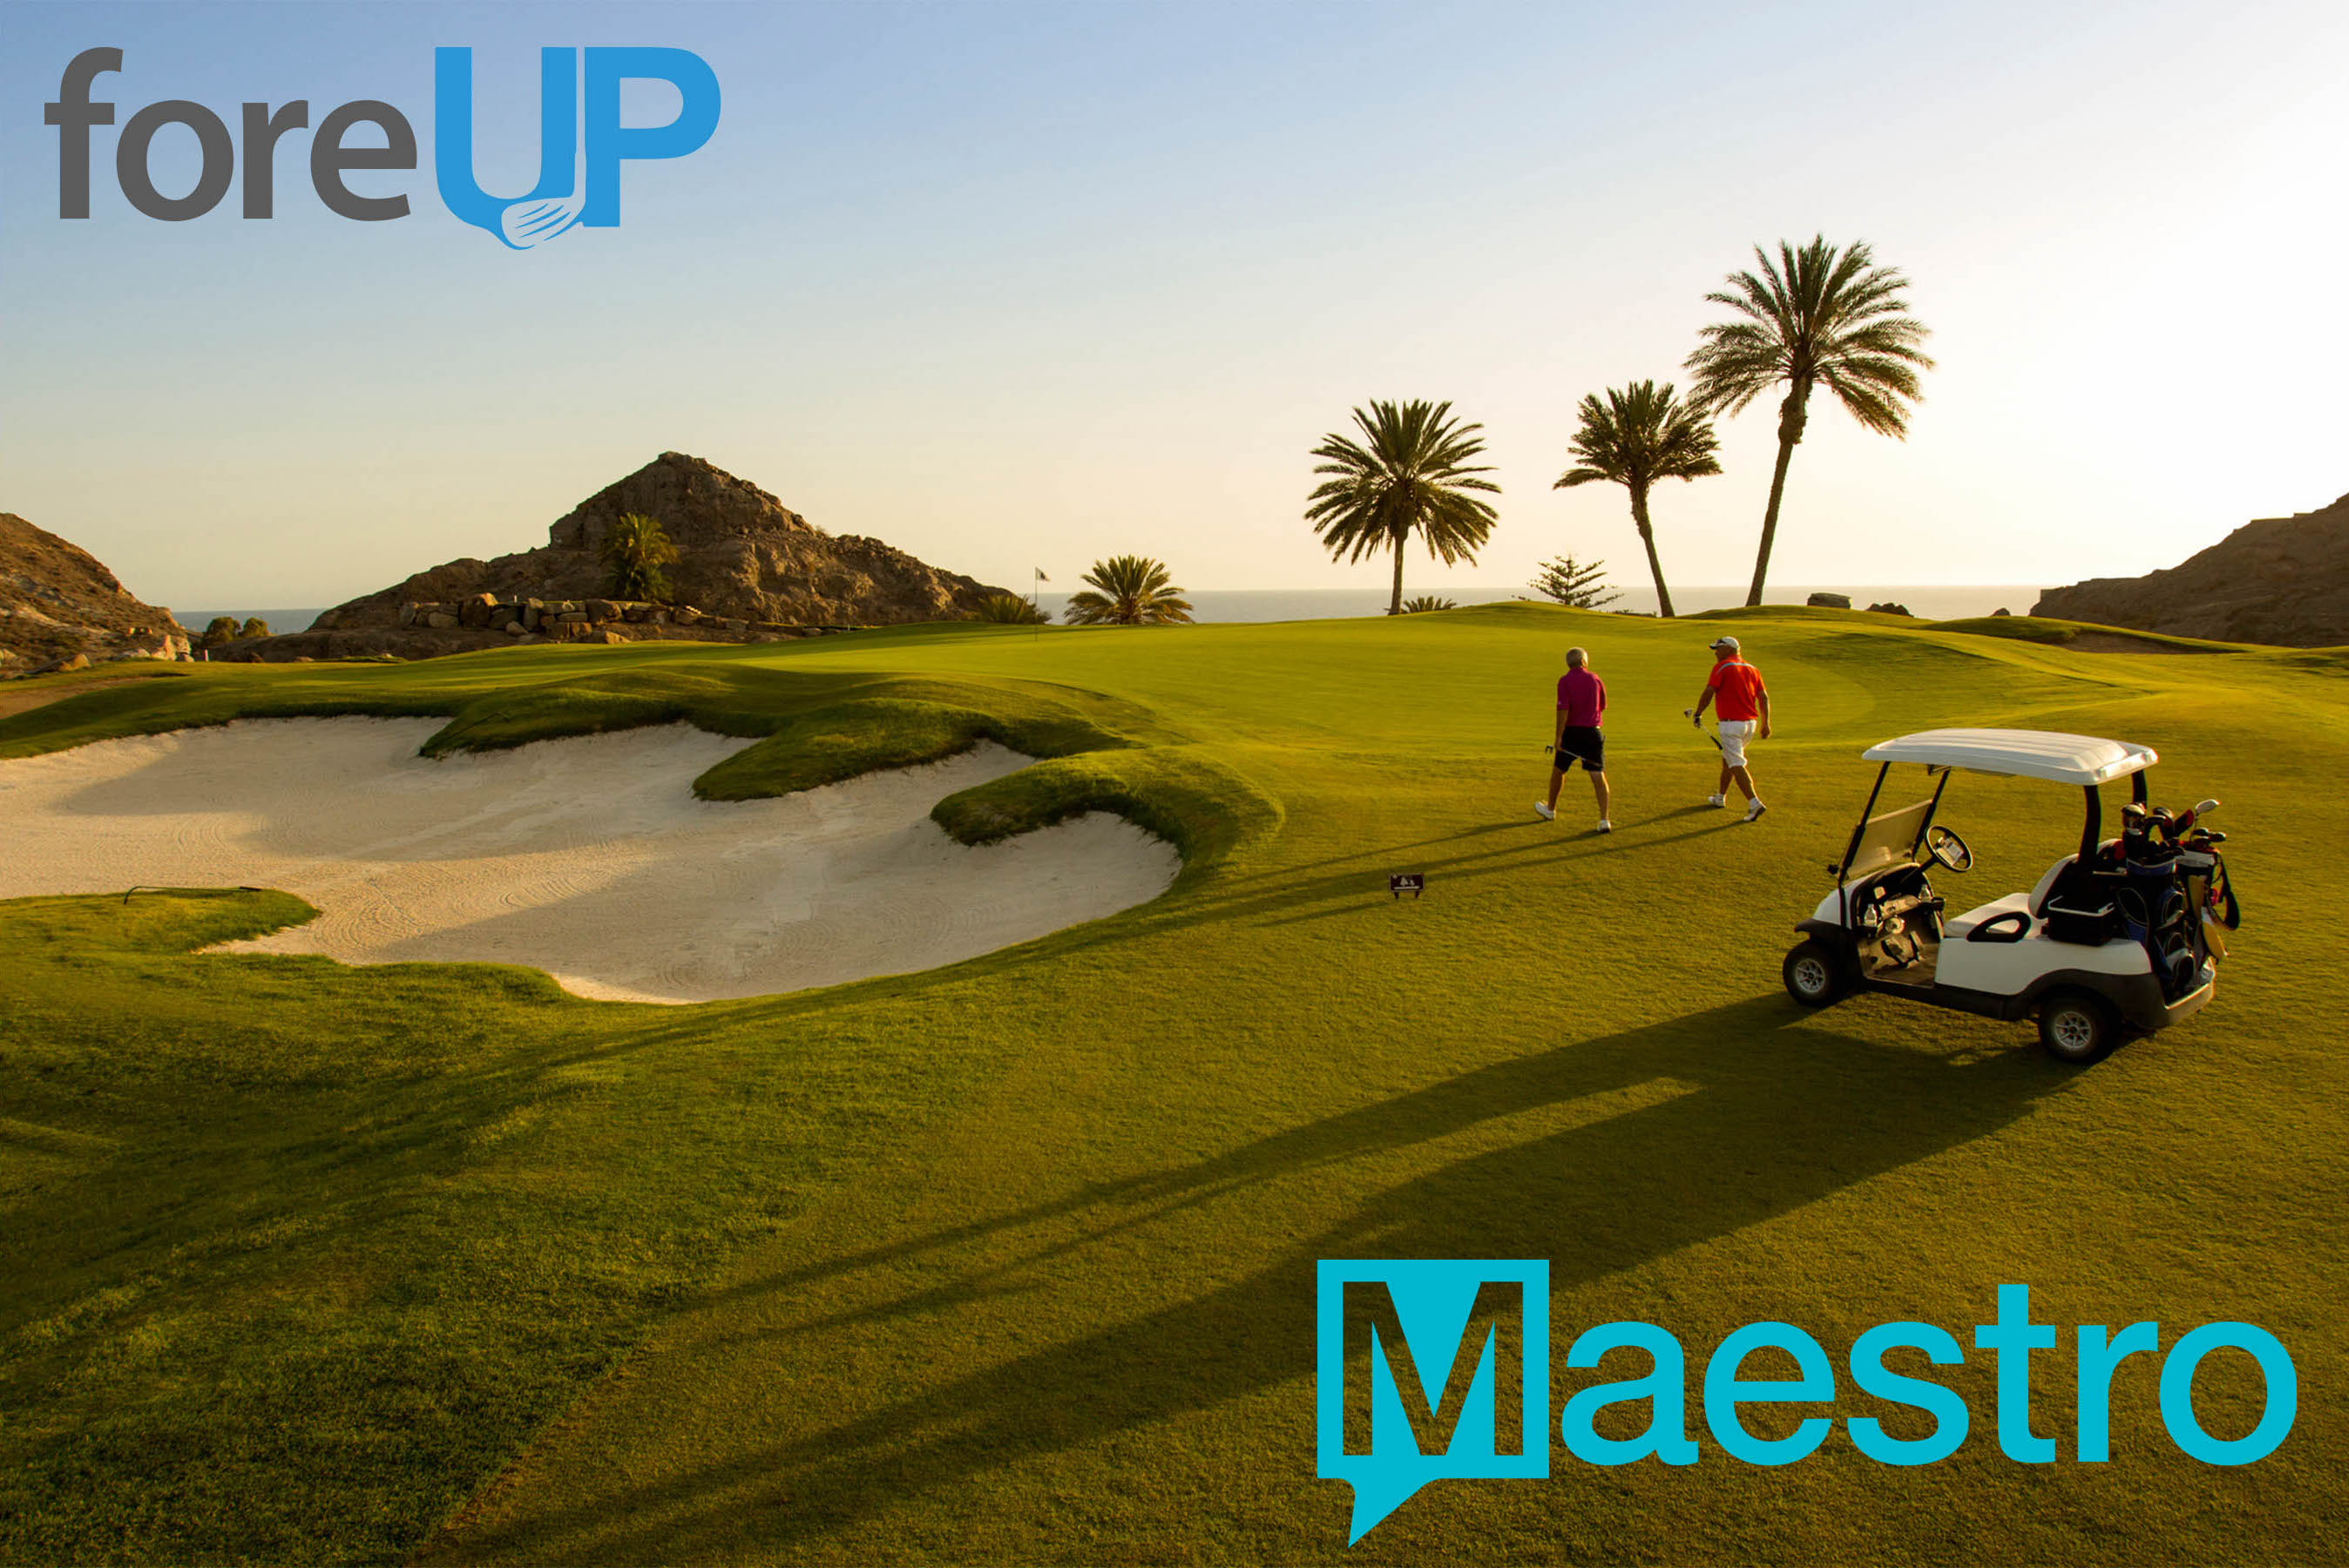 prnov16 - Maestro PMS, foreUP Golf Two Way Real-Time Integration Drives Efficiencies, Revenues, and Satisfaction for Hotel and Resort Groups - Innovative Property Management Software Solutions Powering Hotels, Resorts & Multi‑Property Groups.